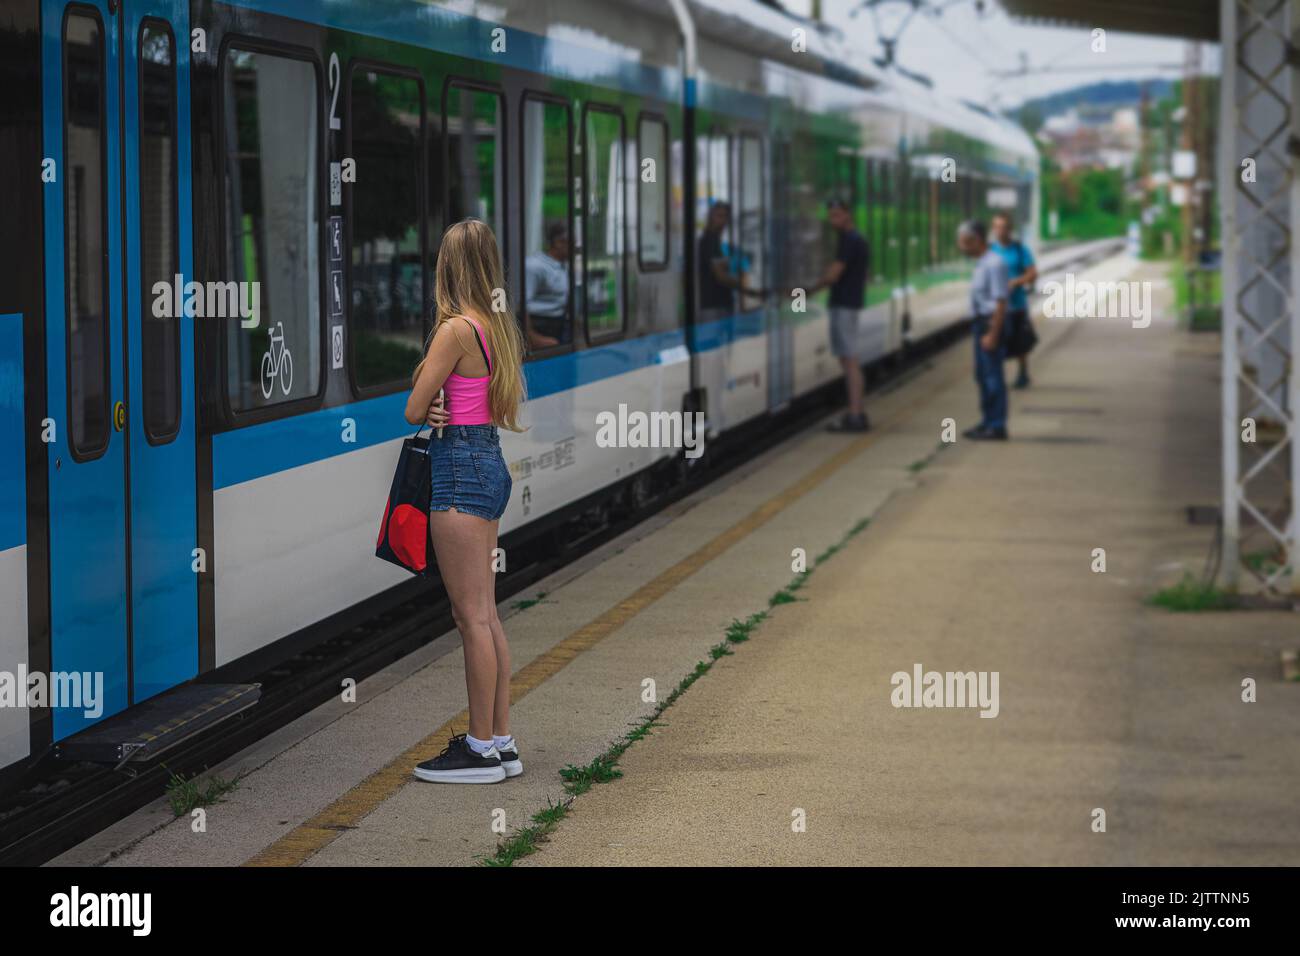 Young female is ready to hop on a train, waiting in front of the door, ready to enter. Nice young woman with sexy jeans shorts waiting for a train. Stock Photo